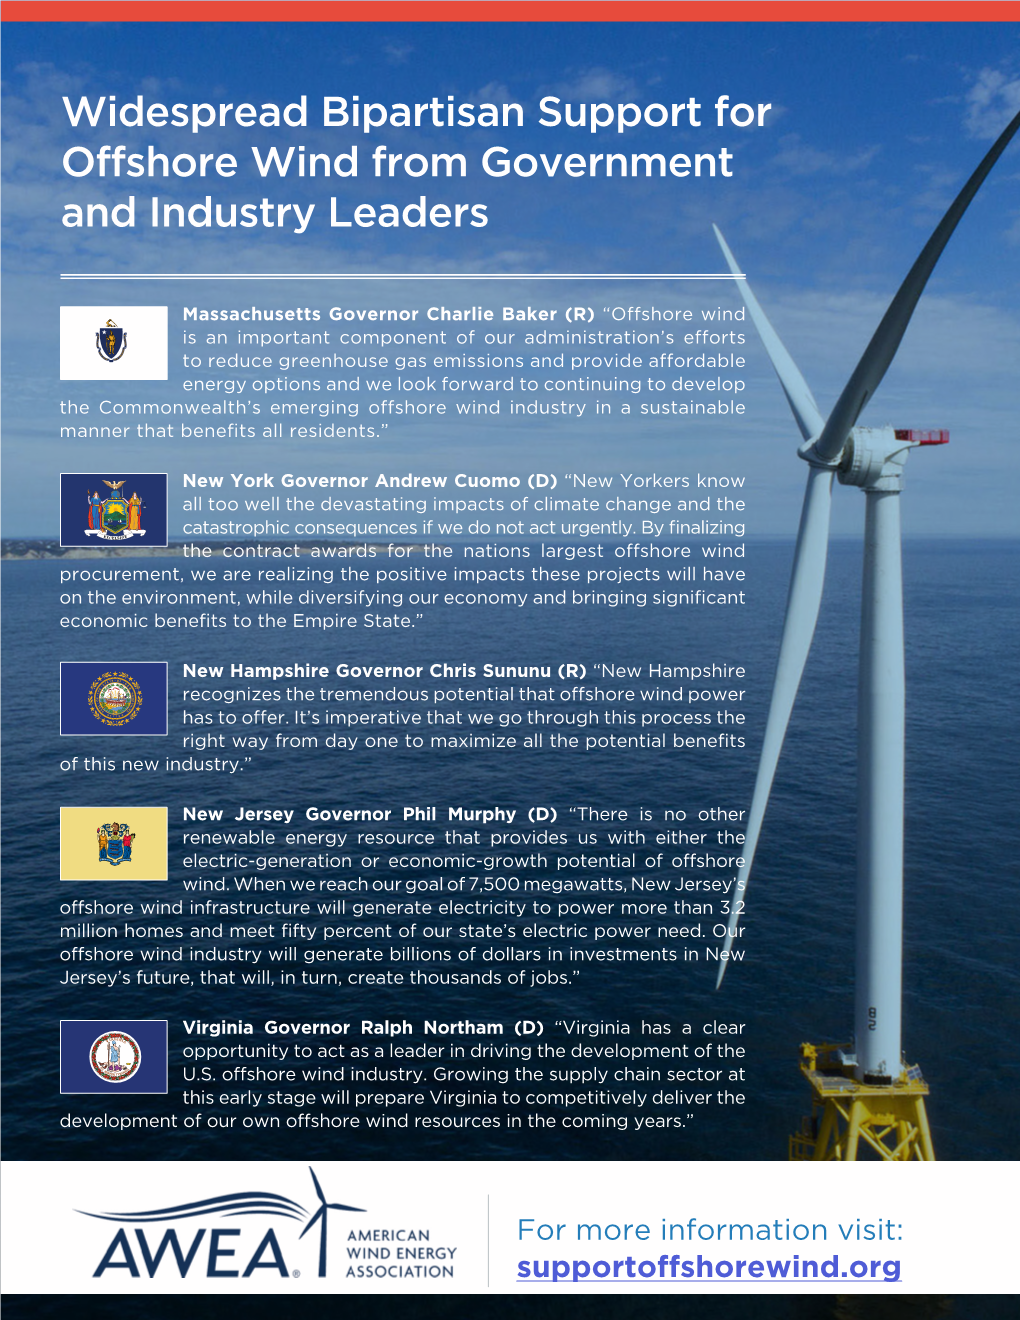 Widespread Bipartisan Support for Offshore Wind from Government and Industry Leaders